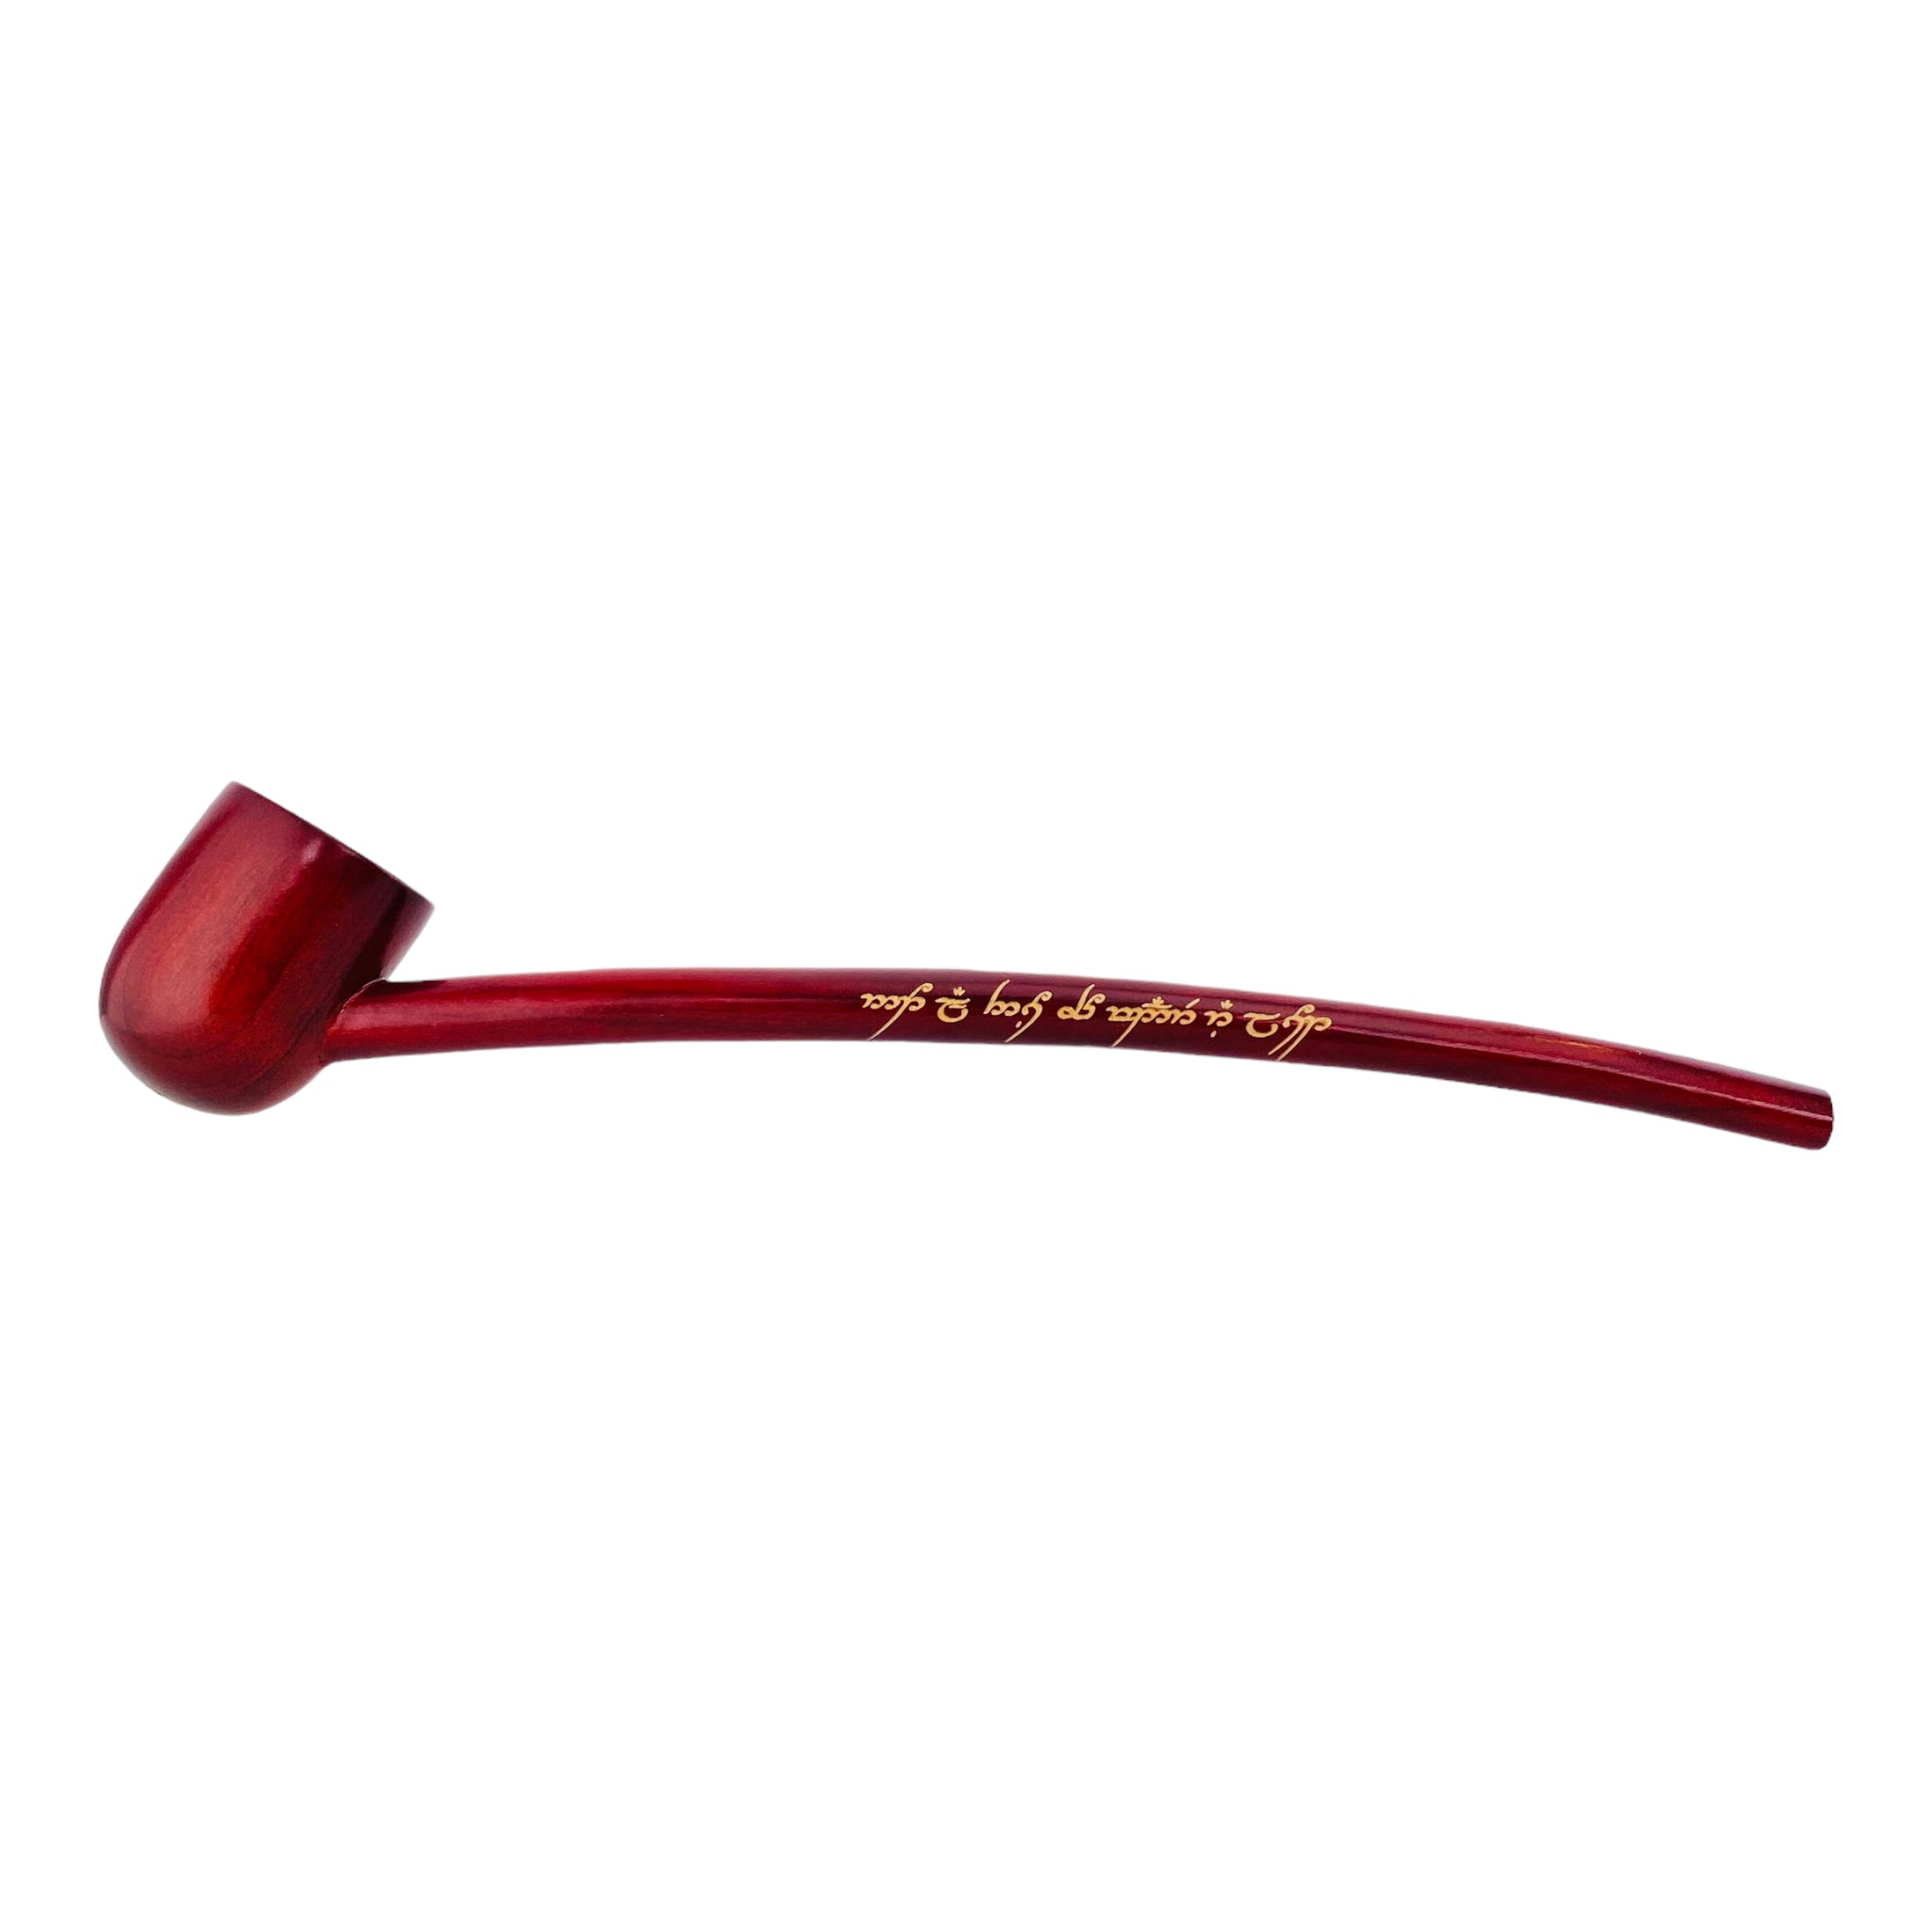 Shire Pipes Lord Of The Rings Aragorn Churchwarden Smoking Pipe